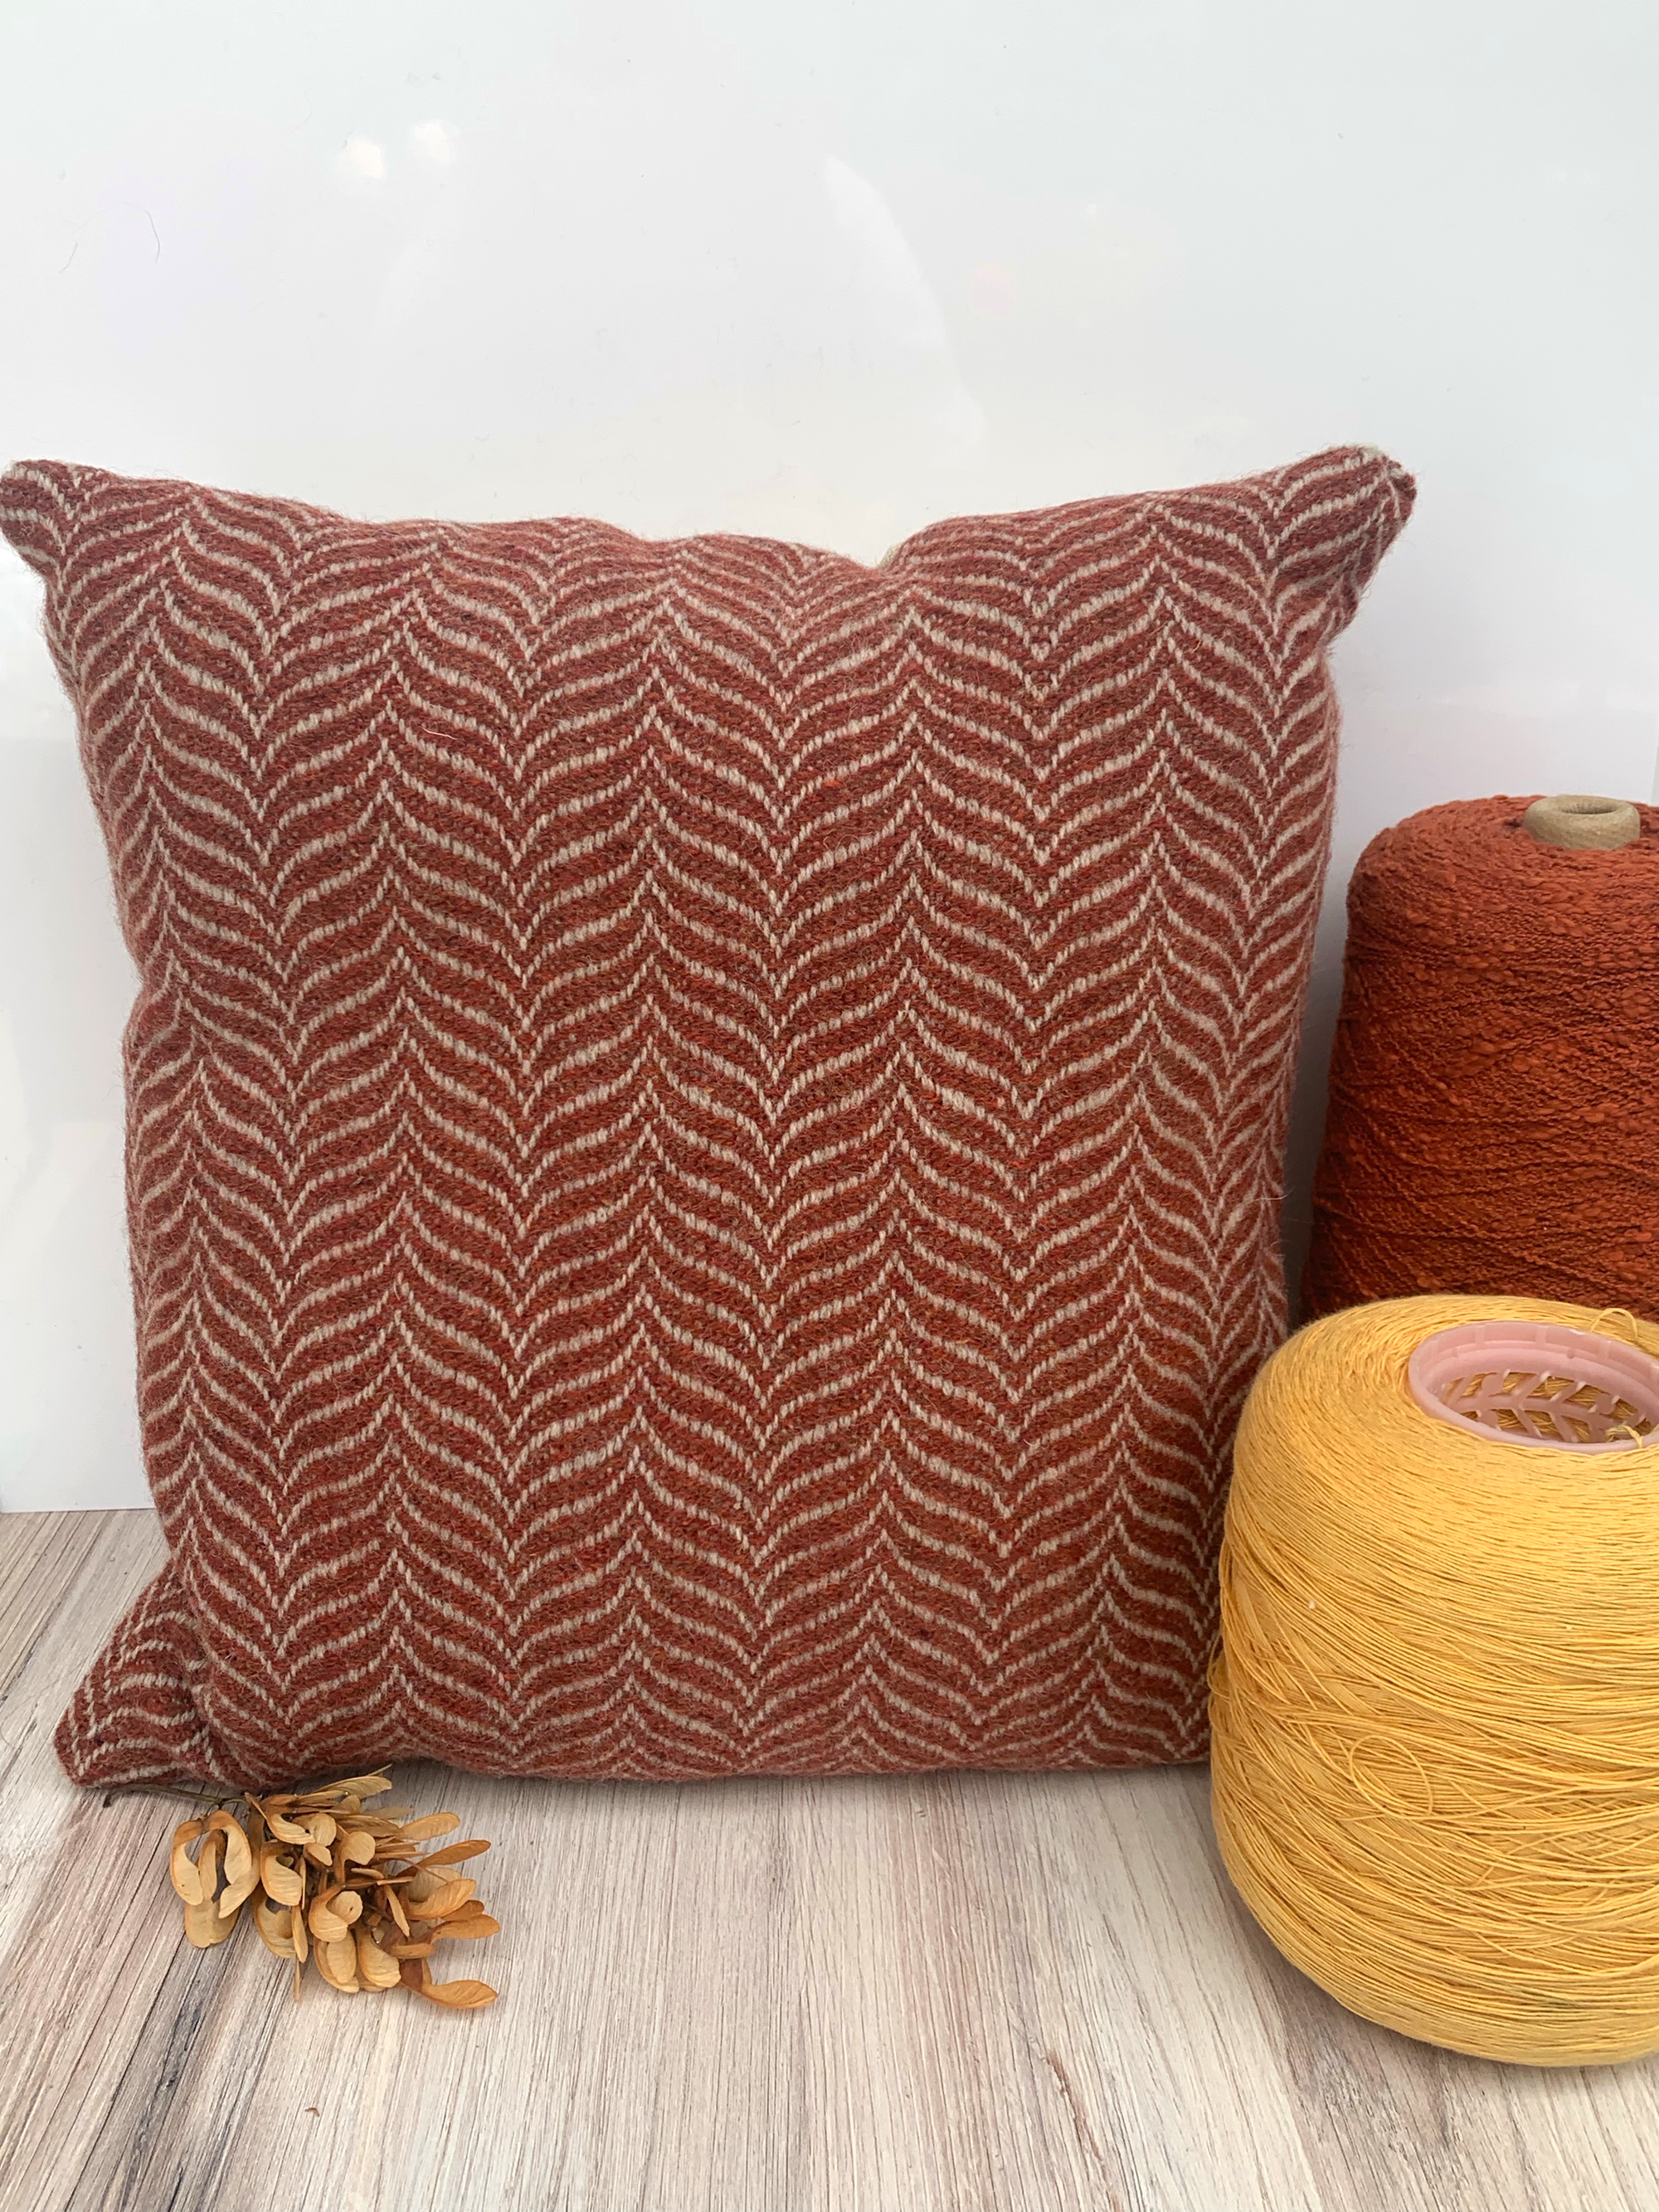 Wyoming Woven Rust Dreams Pillow